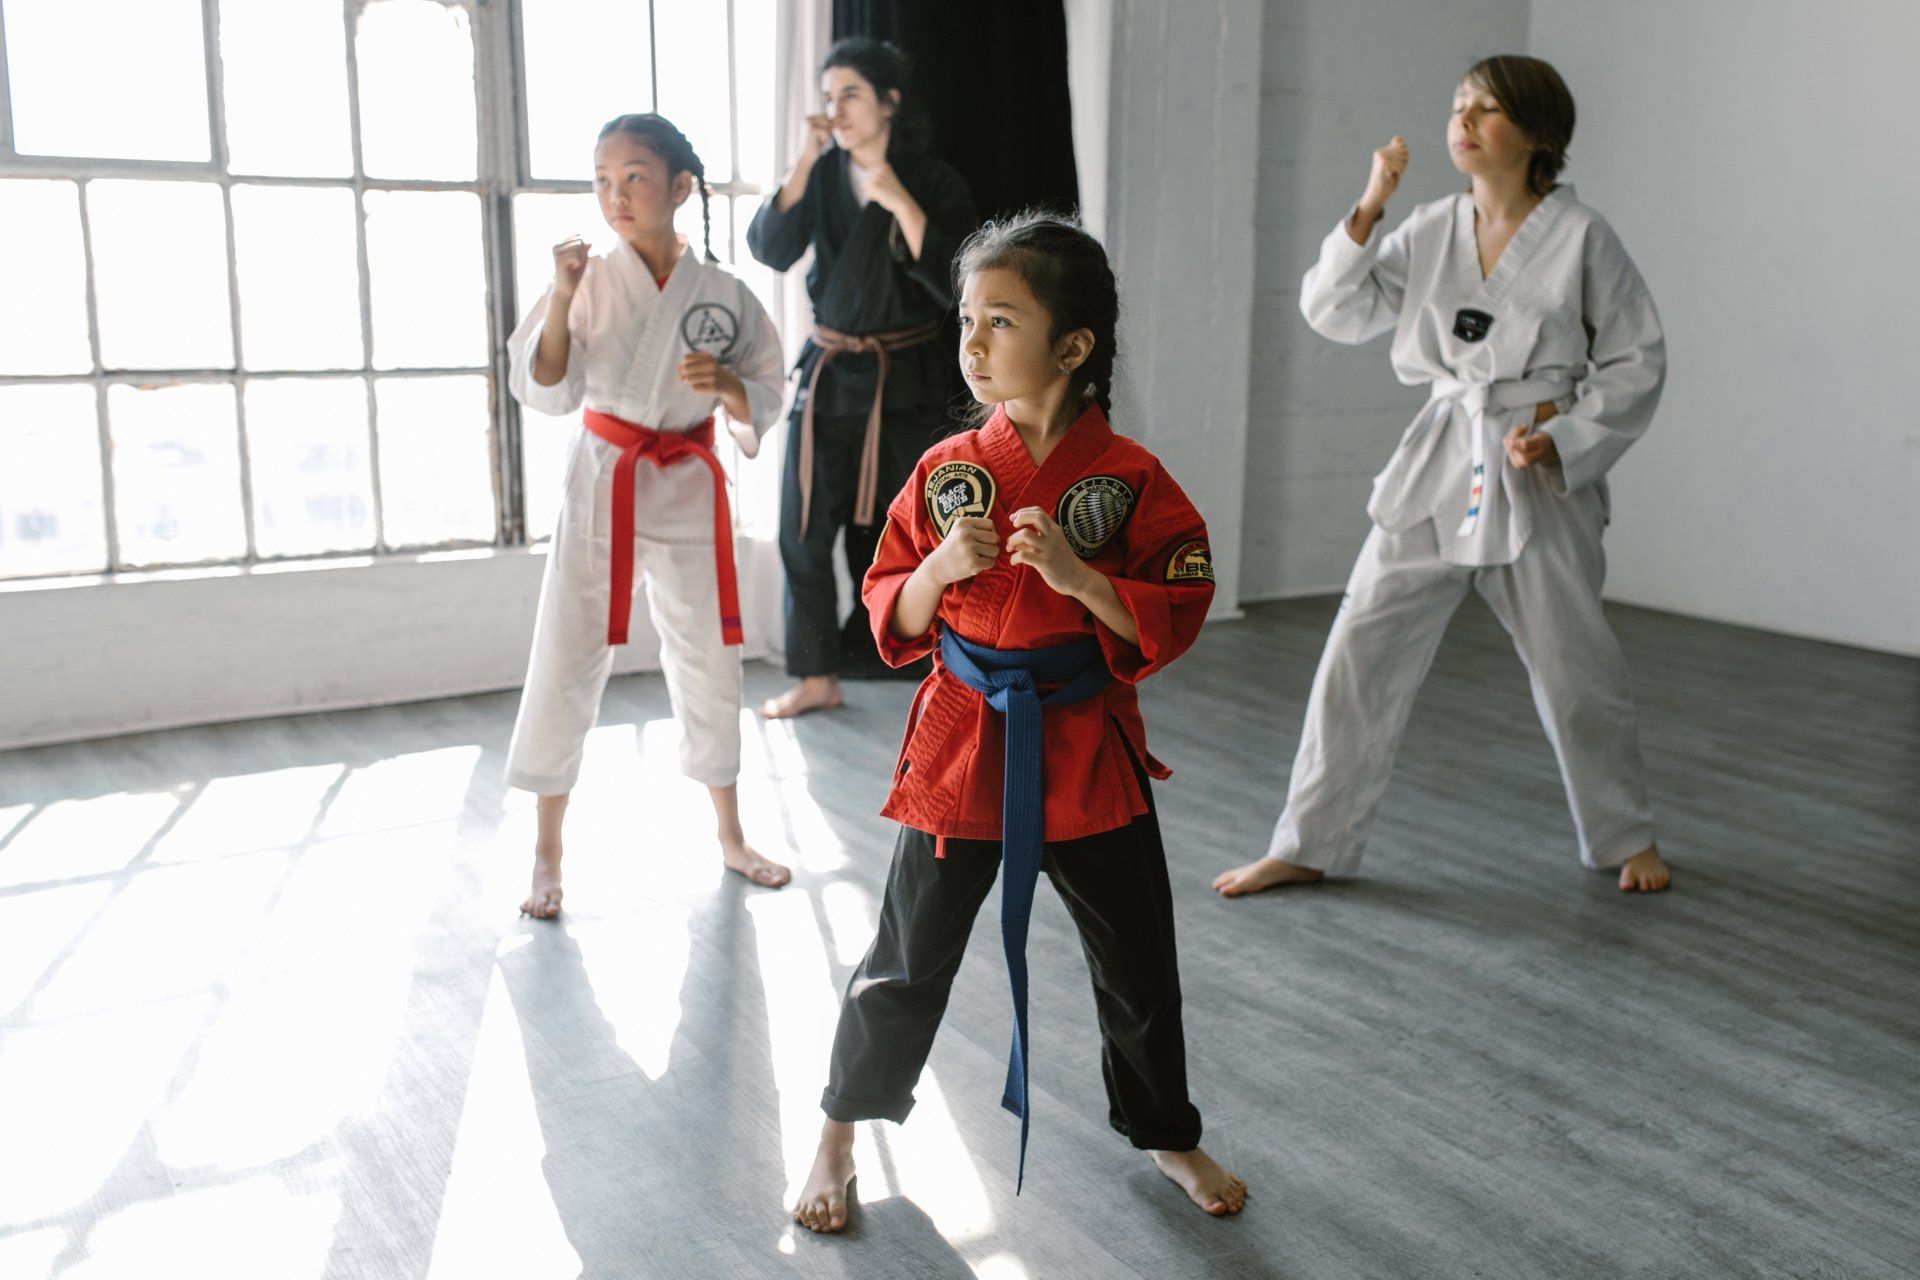 a girl in a red karate uniform with the letter a on it